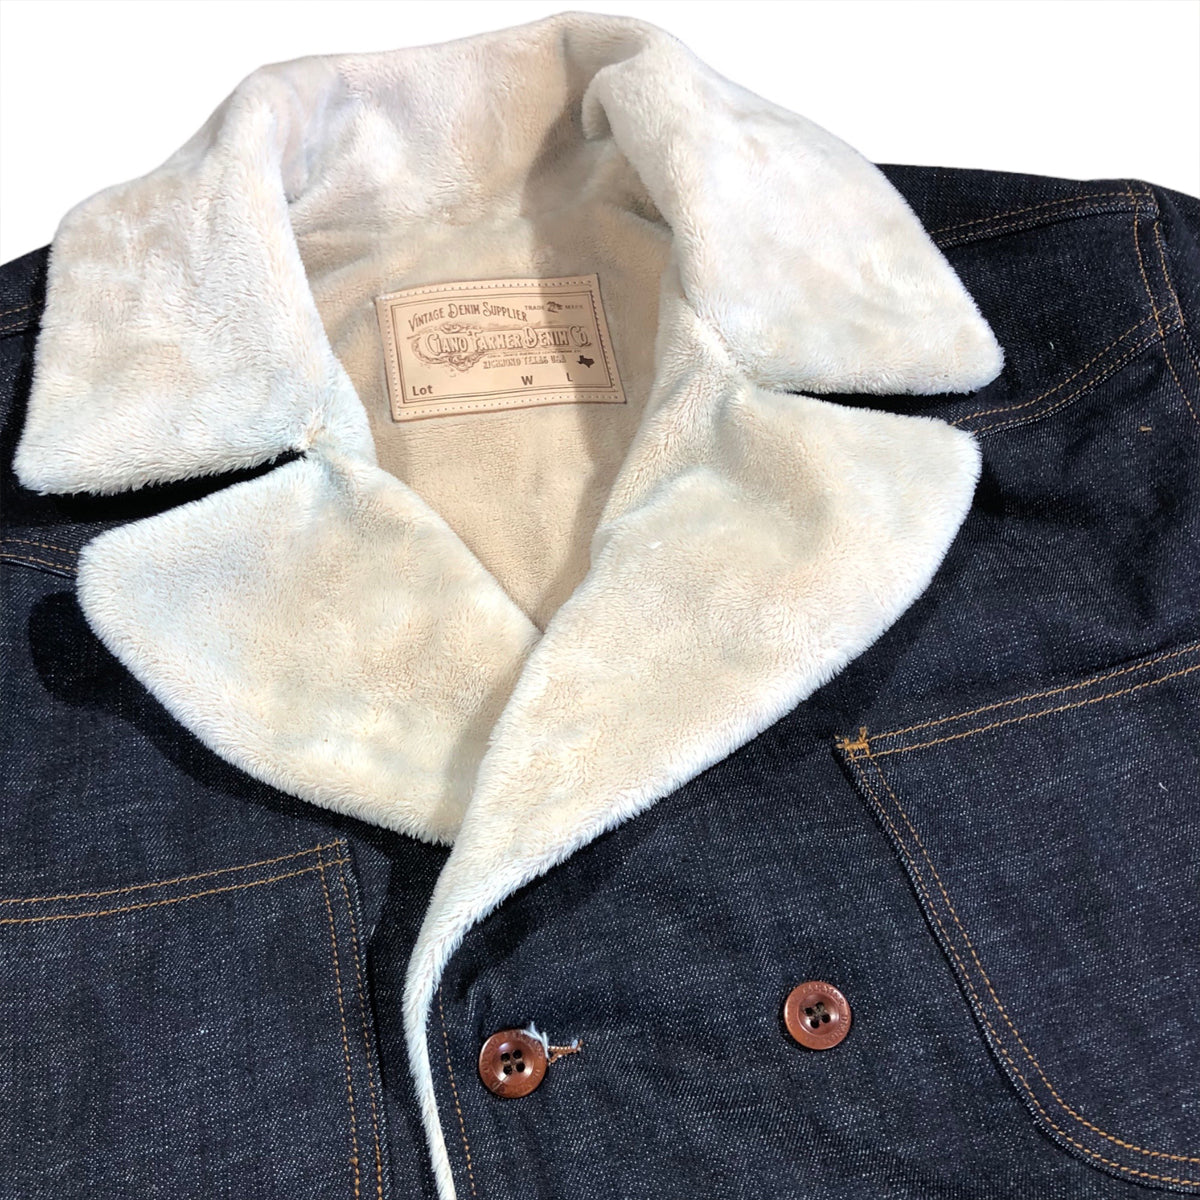 #80 14oz Cone Mills Selvage Denim Pea Coat with Sherpa Liner